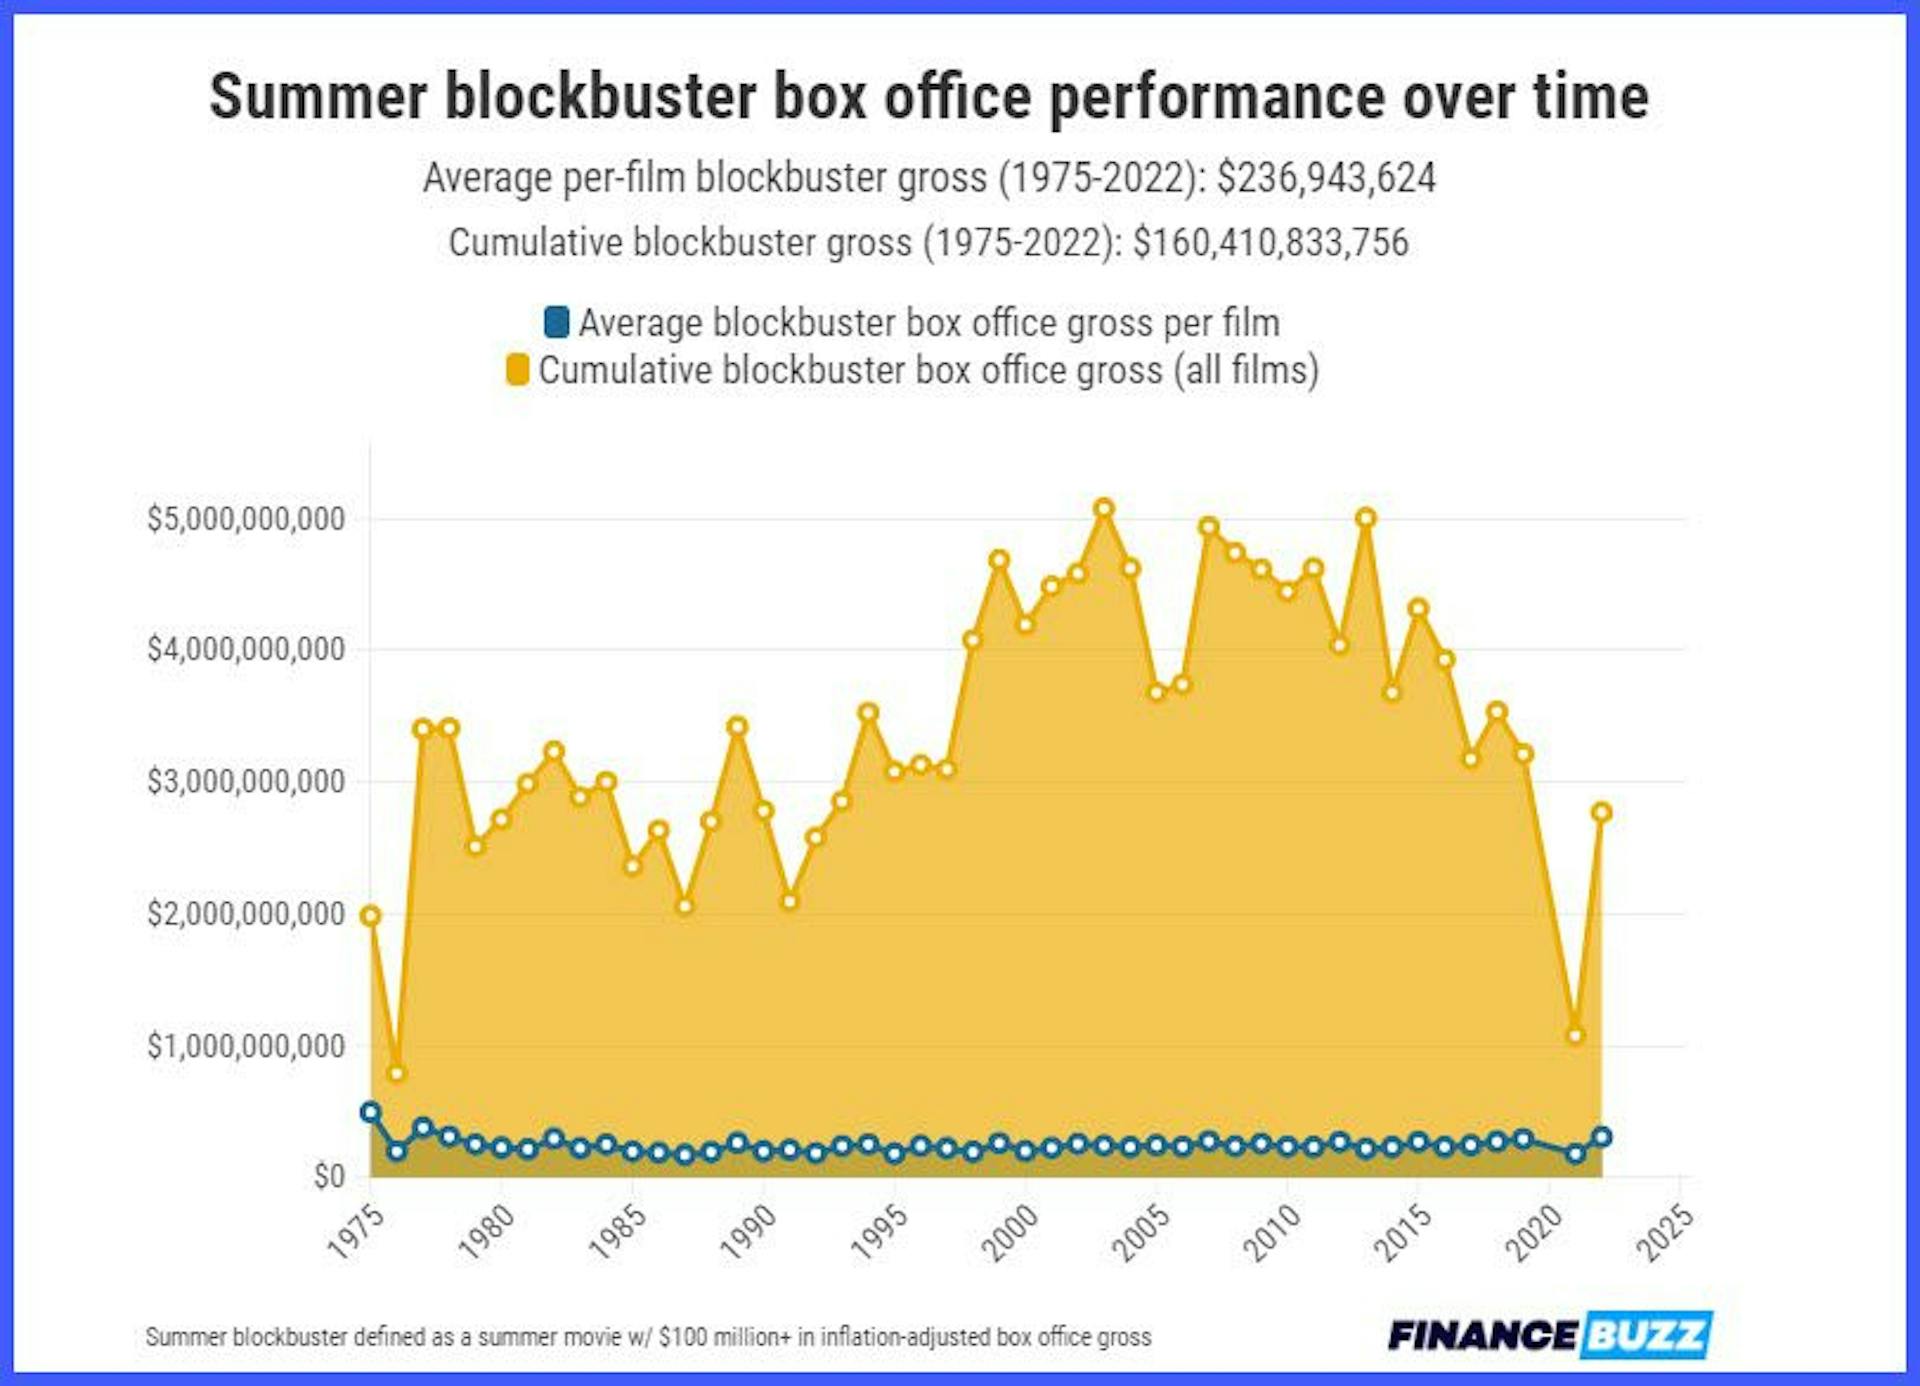 Summer blockbuster defined as a summer movie w/ $100 million+ in inflation-adjusted box office gross.